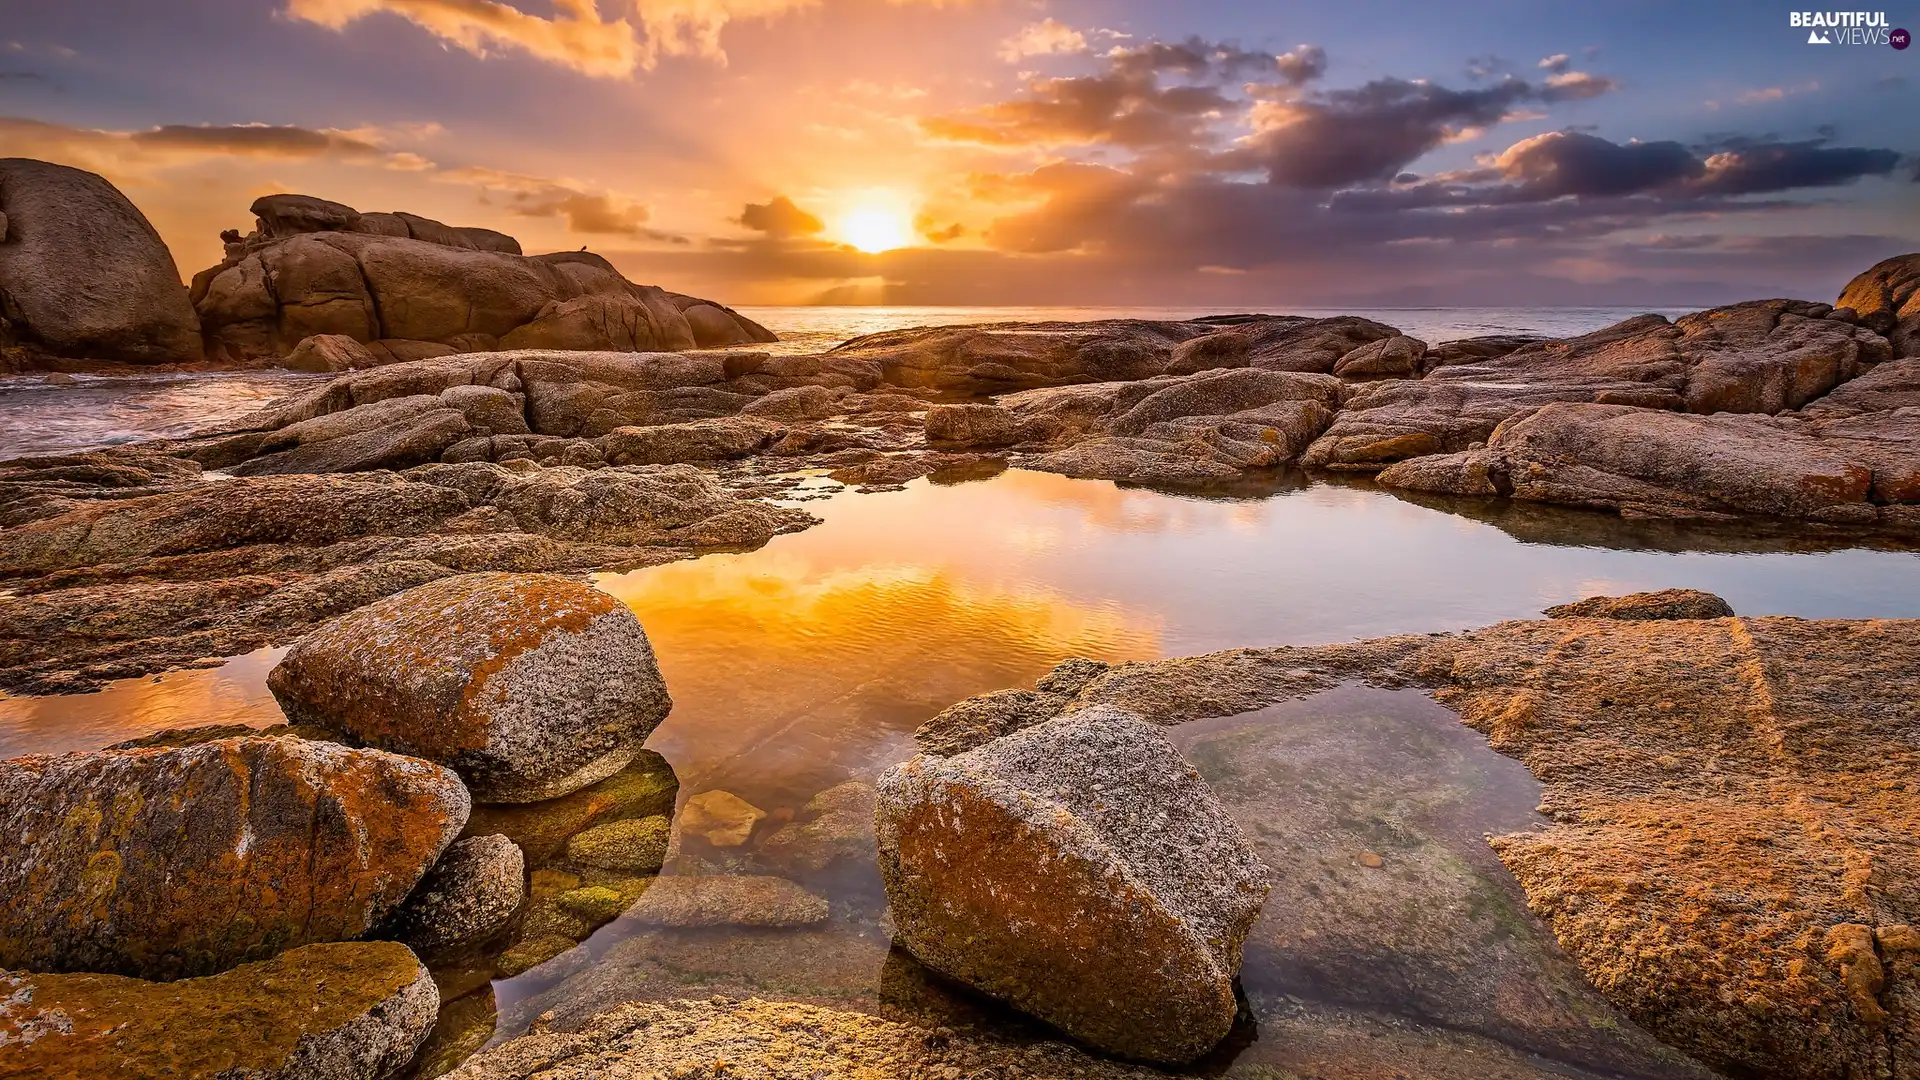 Boulders Beach, South Africa, sea, Stones, Great Sunsets, Cape Peninsula